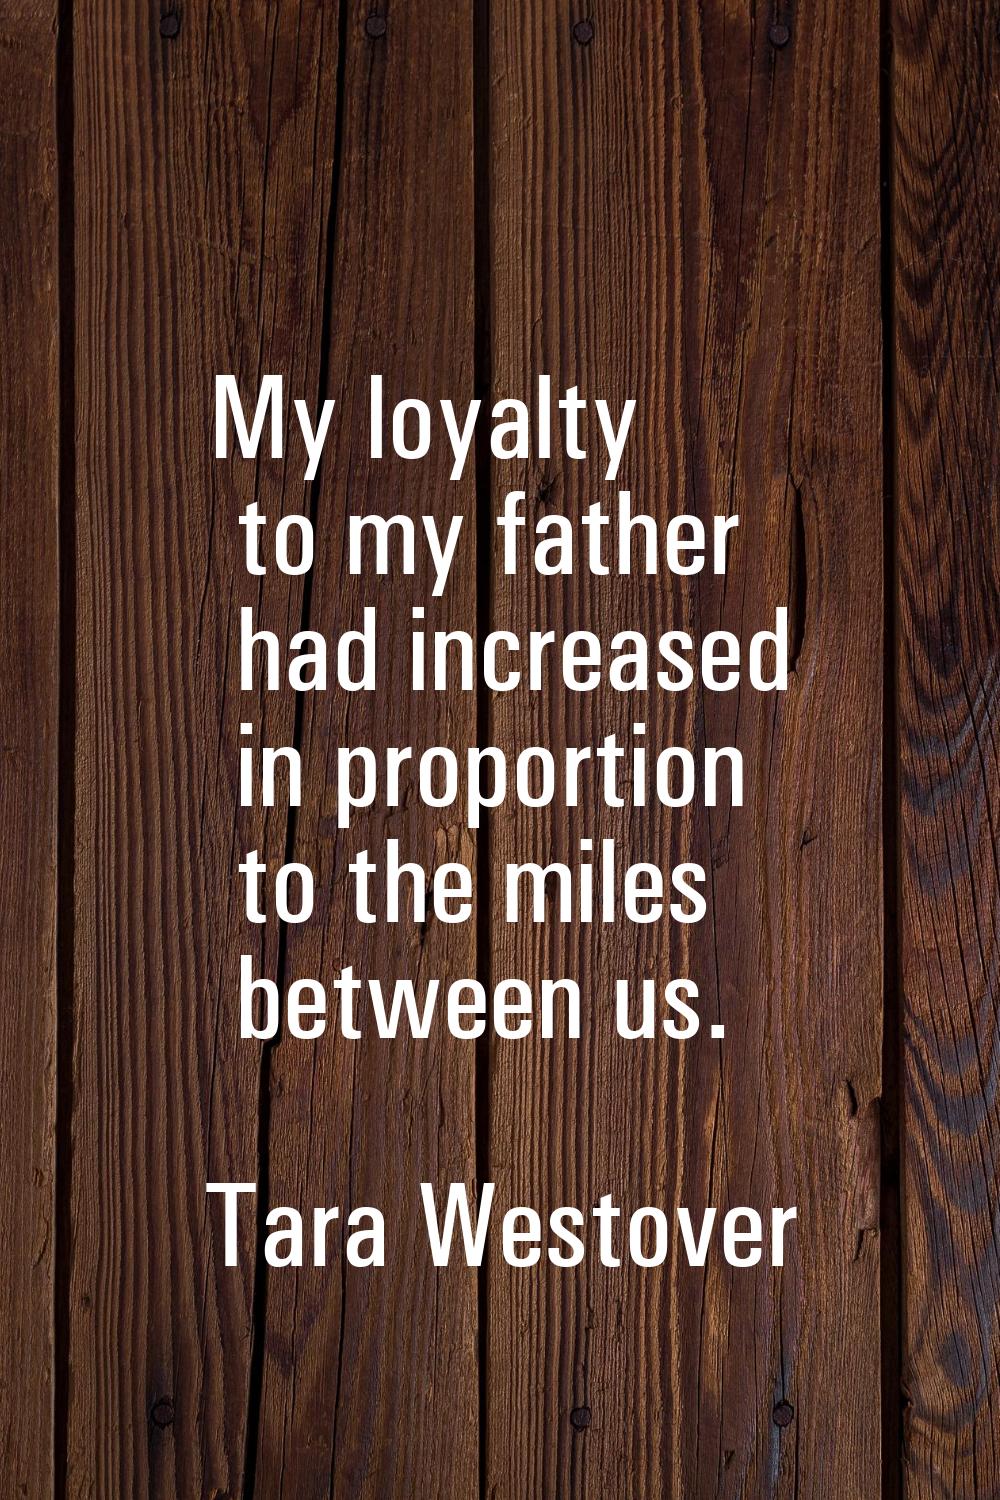 My loyalty to my father had increased in proportion to the miles between us.